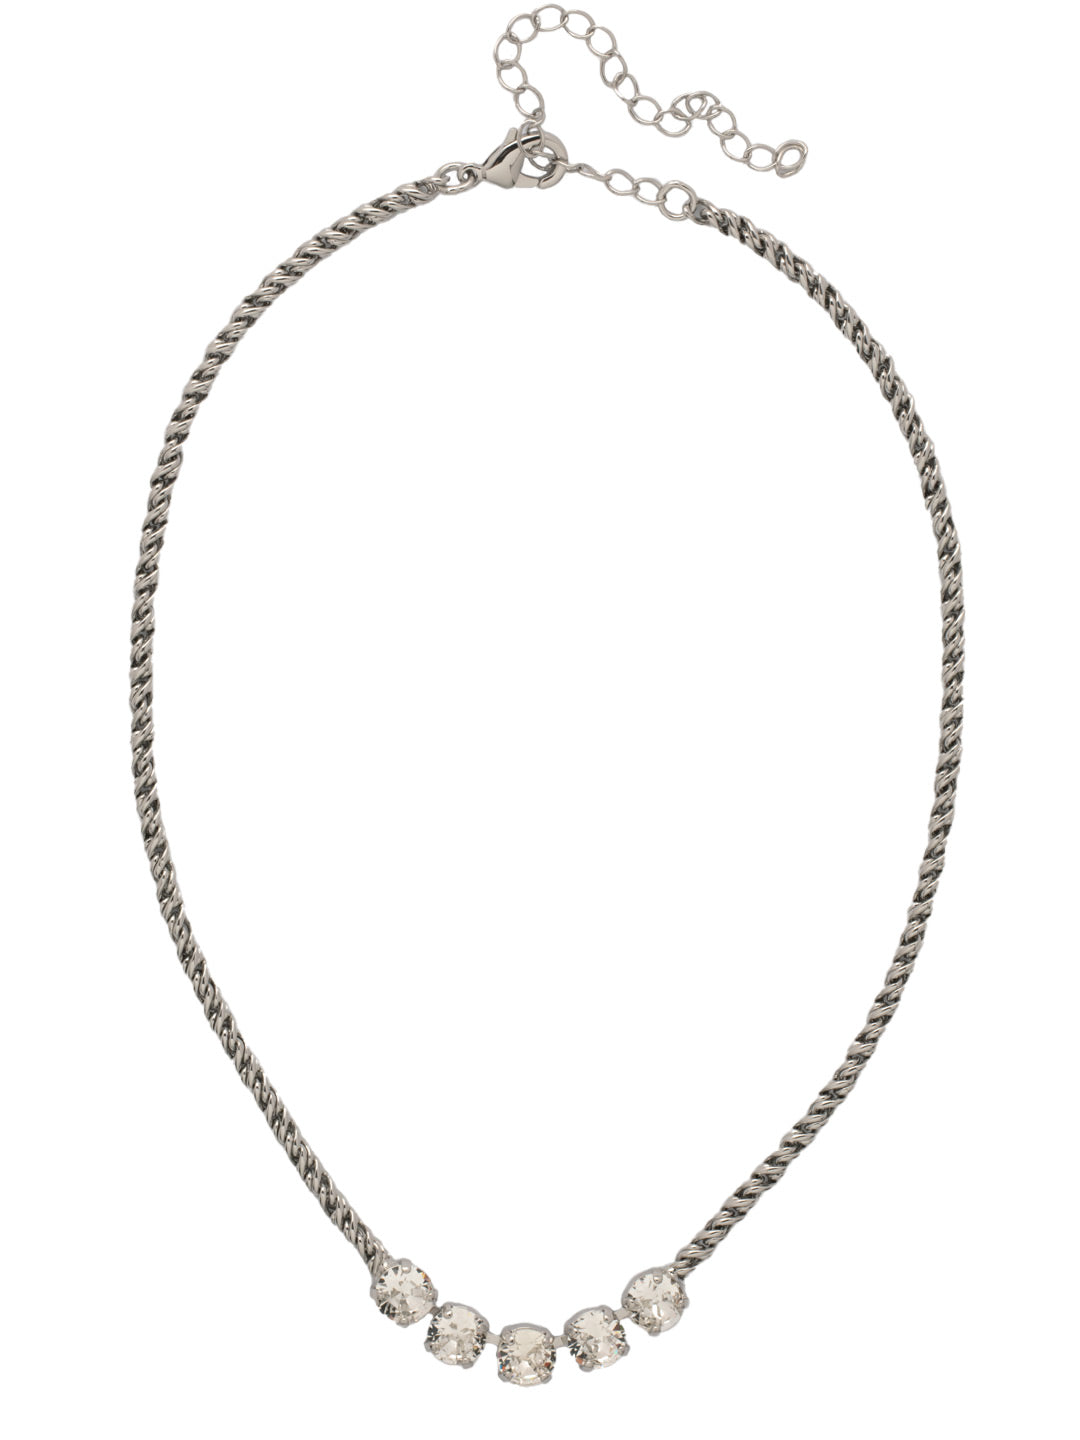 Shannon Tennis Necklace - NFL1PDCRY - <p>The Shannon Tennis Necklace features a line of five round cut crystals on an adjustable rope chain, secured by a lobster claw clasp. From Sorrelli's Crystal collection in our Palladium finish.</p>